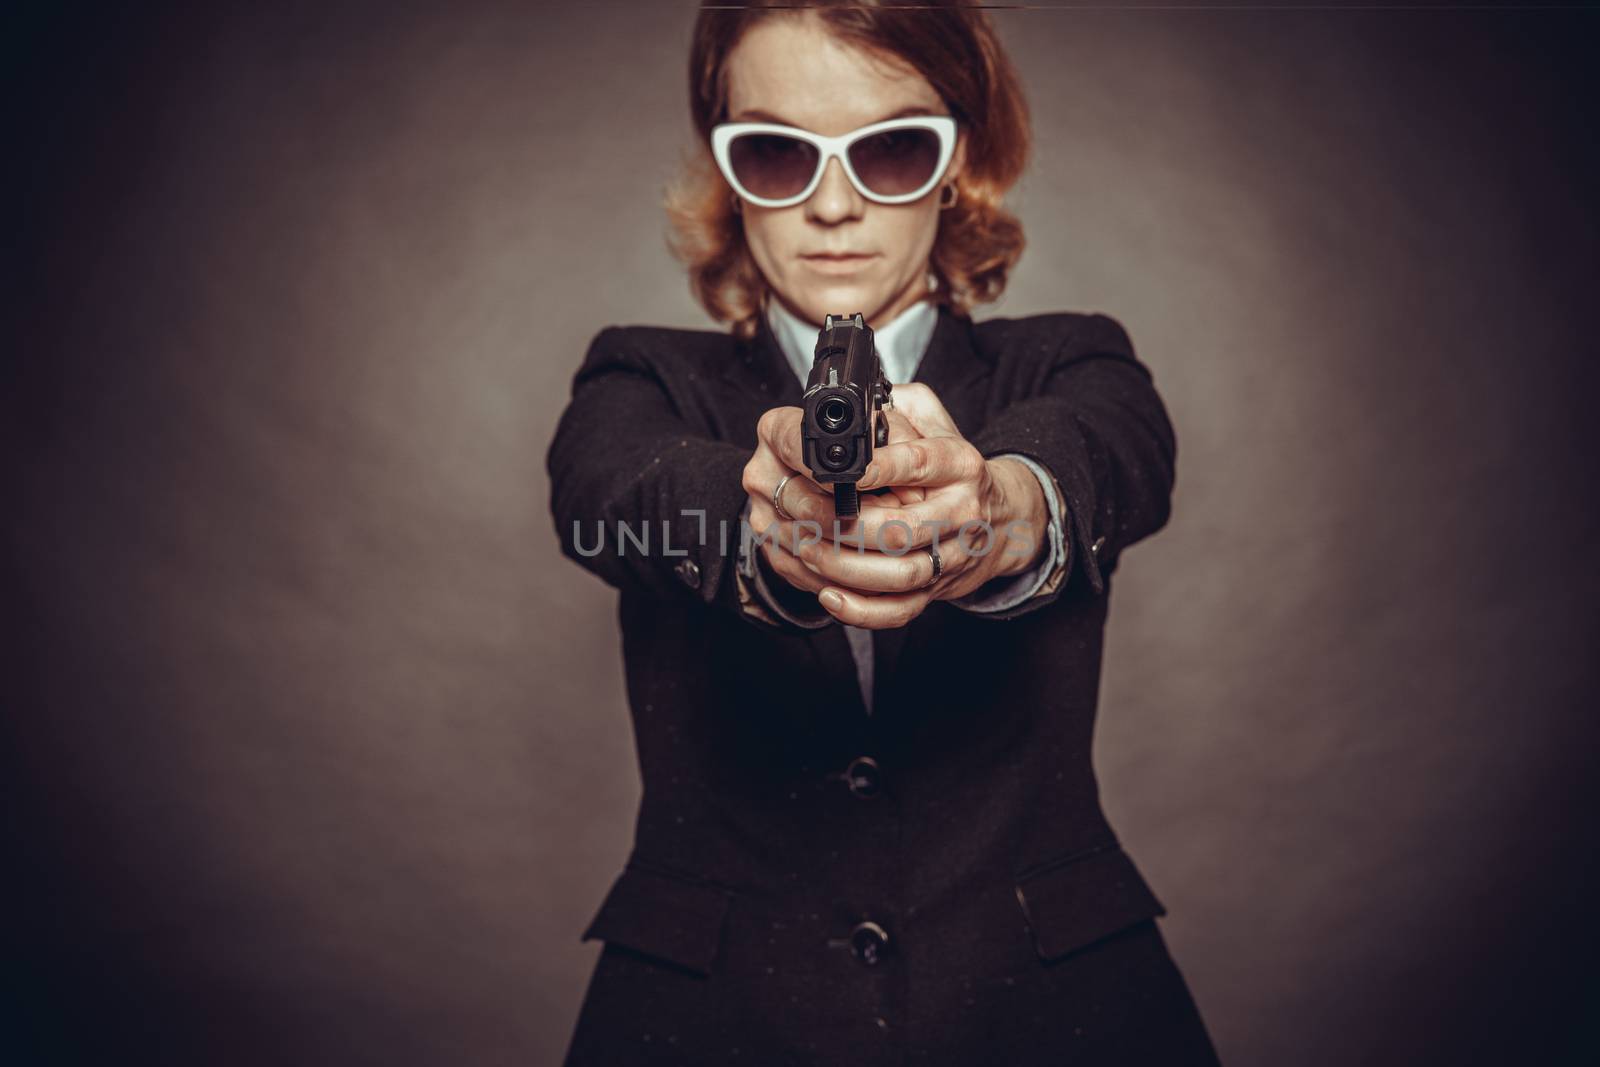 aiming weapon woman in suit. dangerous situation, endangerment by Edophoto